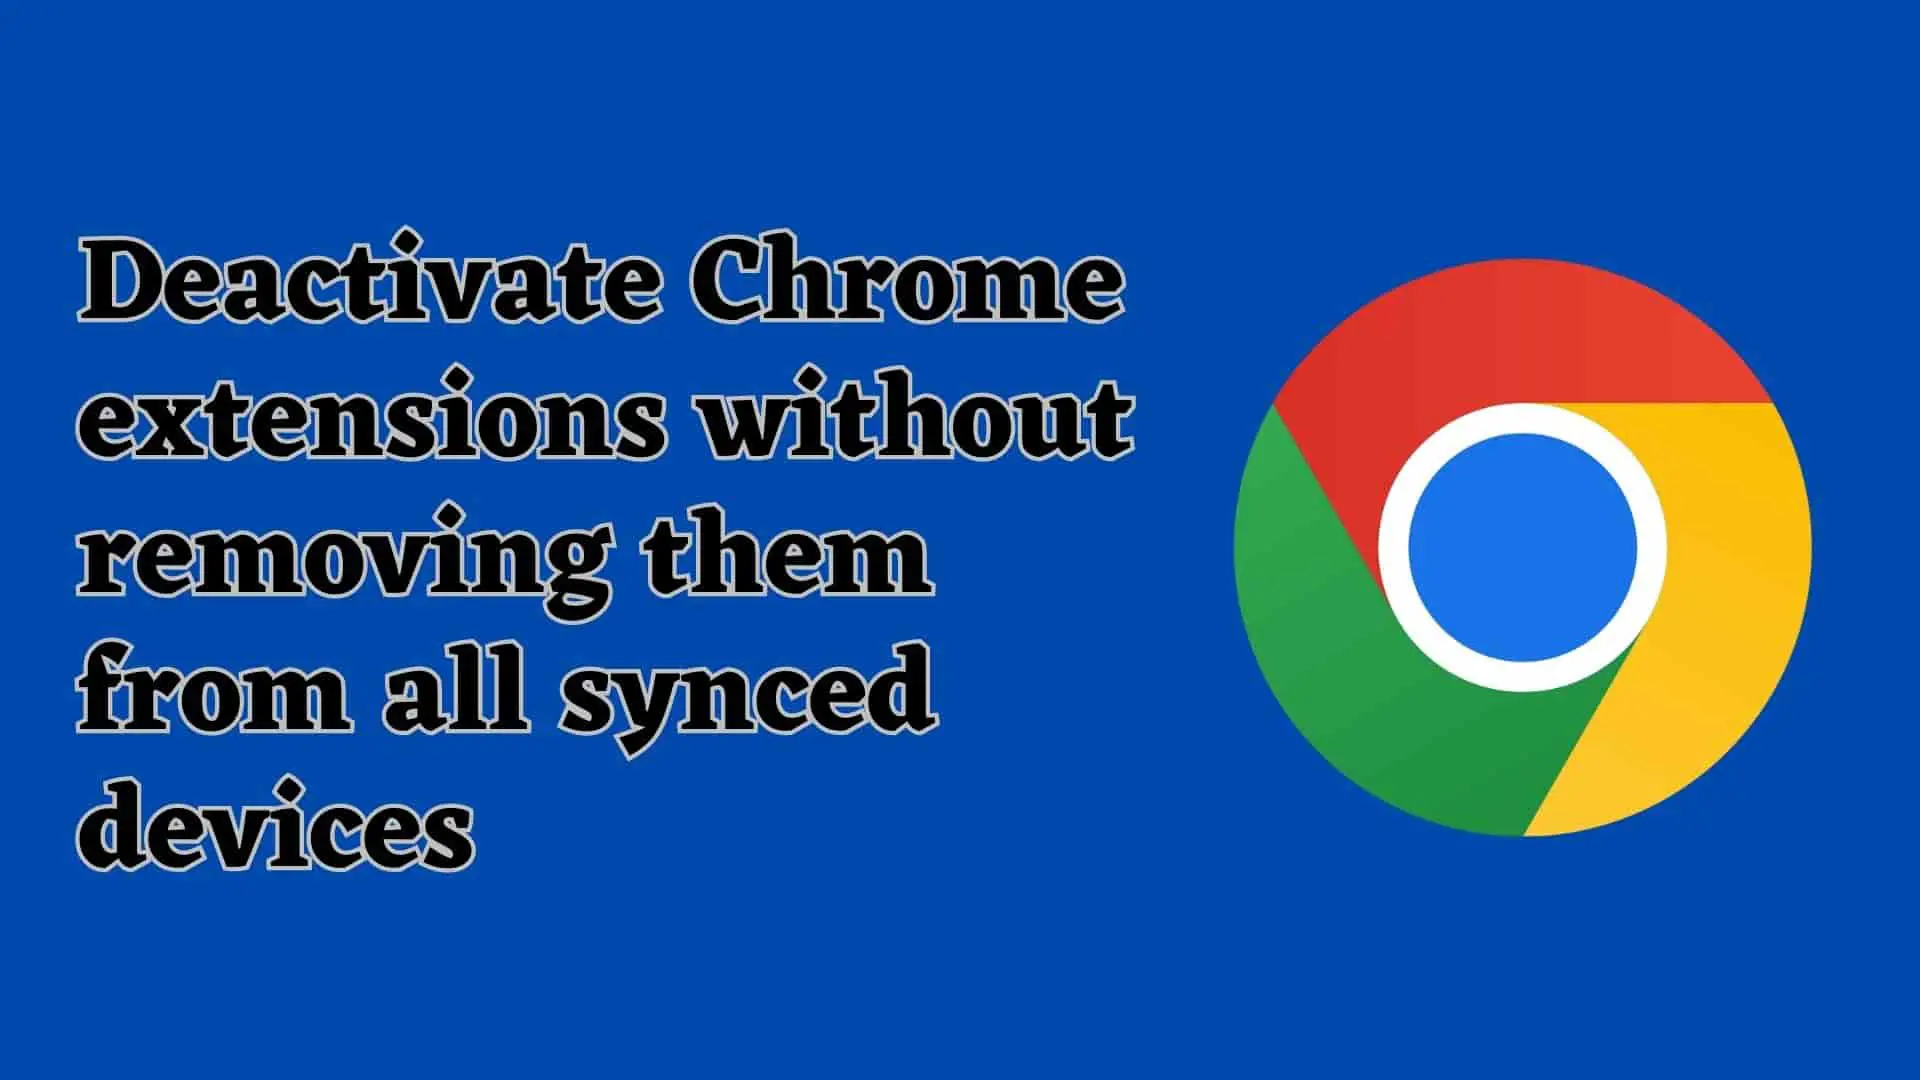 deactivate-chrome-extensions-without-removing-from-synced-devices